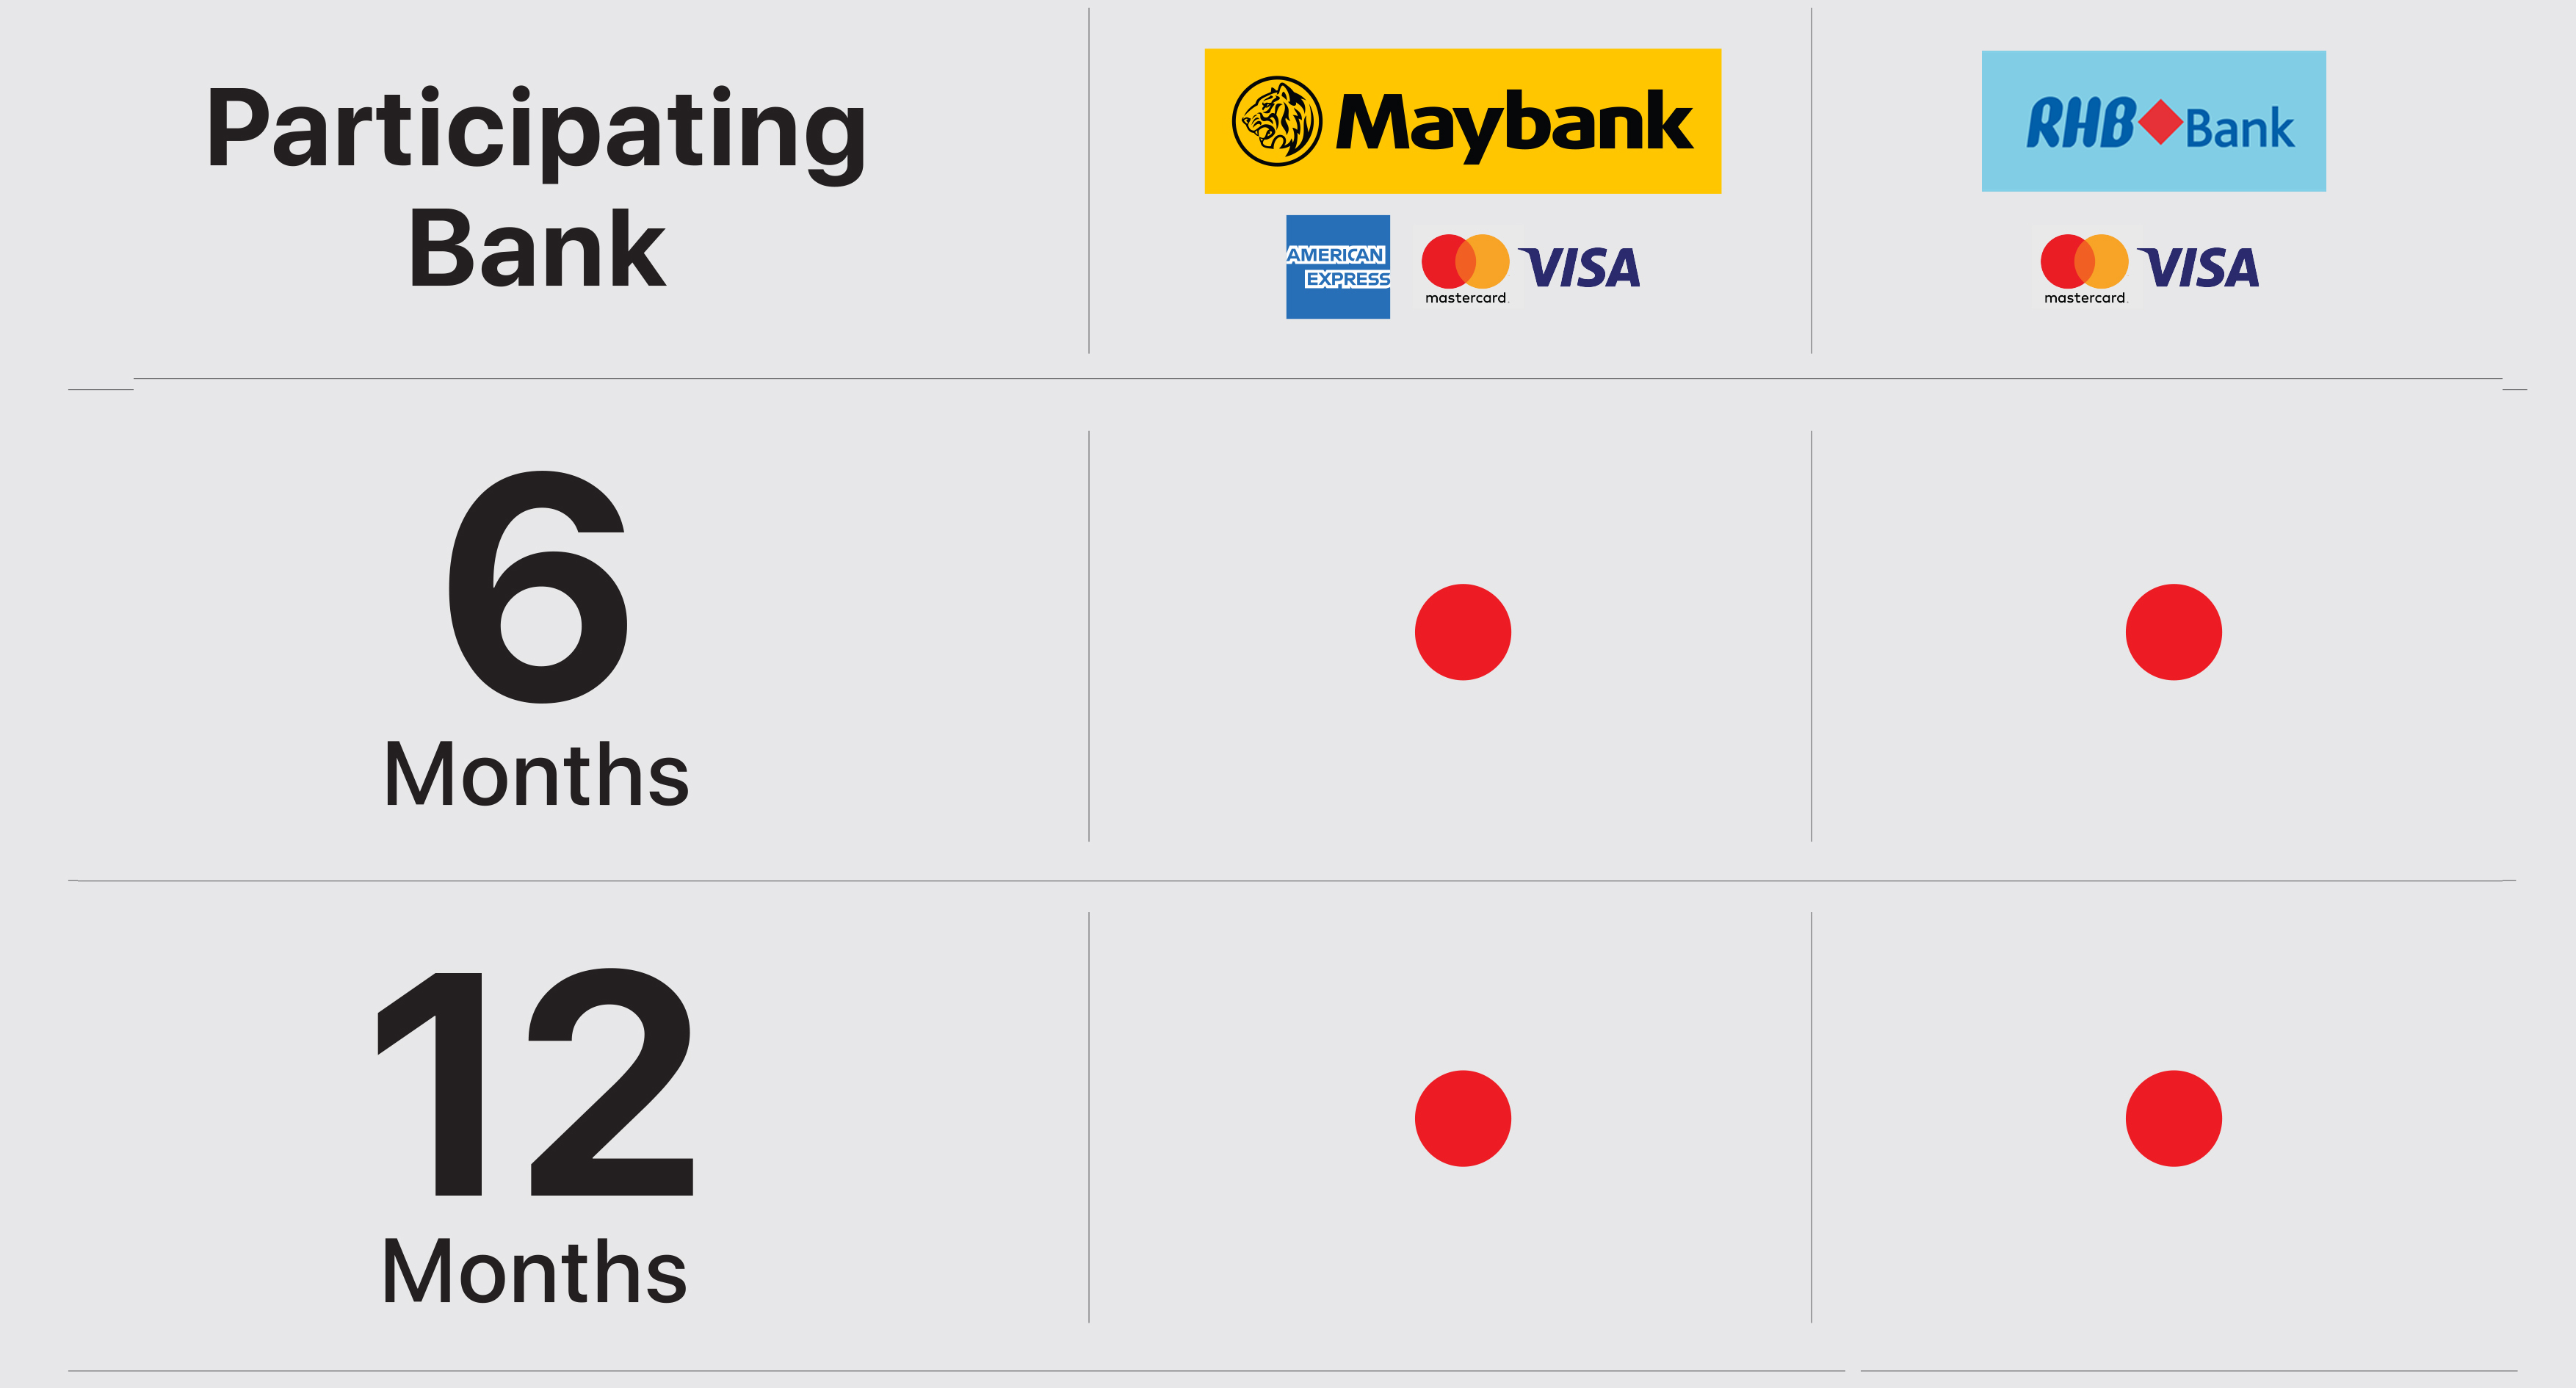 maybank easy payment plan